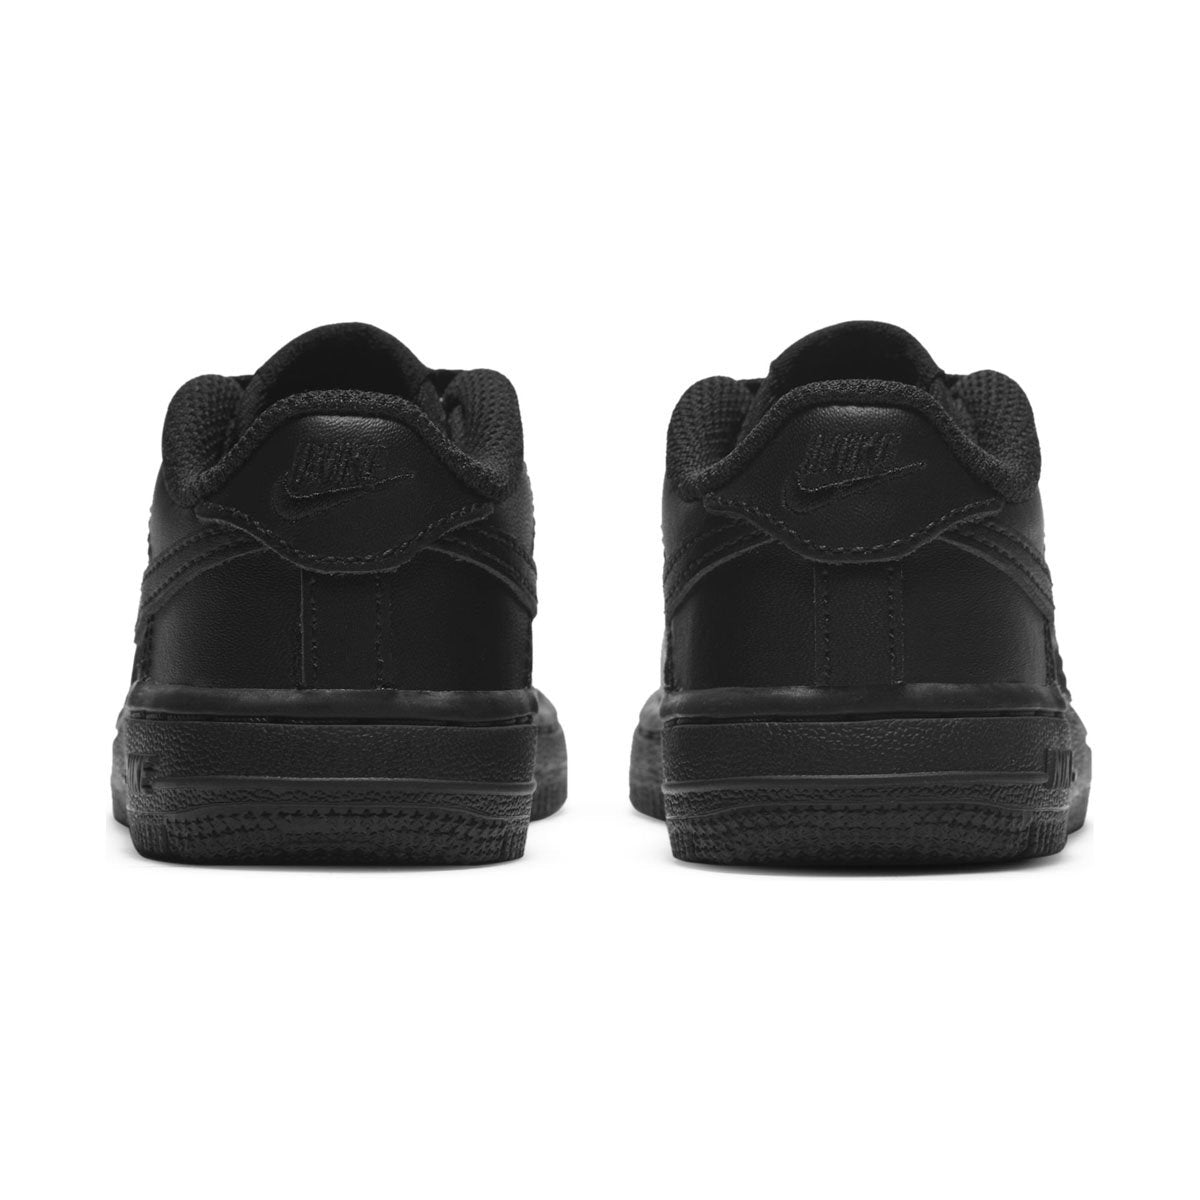 Big Kids' Nike Air Force 1 MId '07 LE Casual Shoes